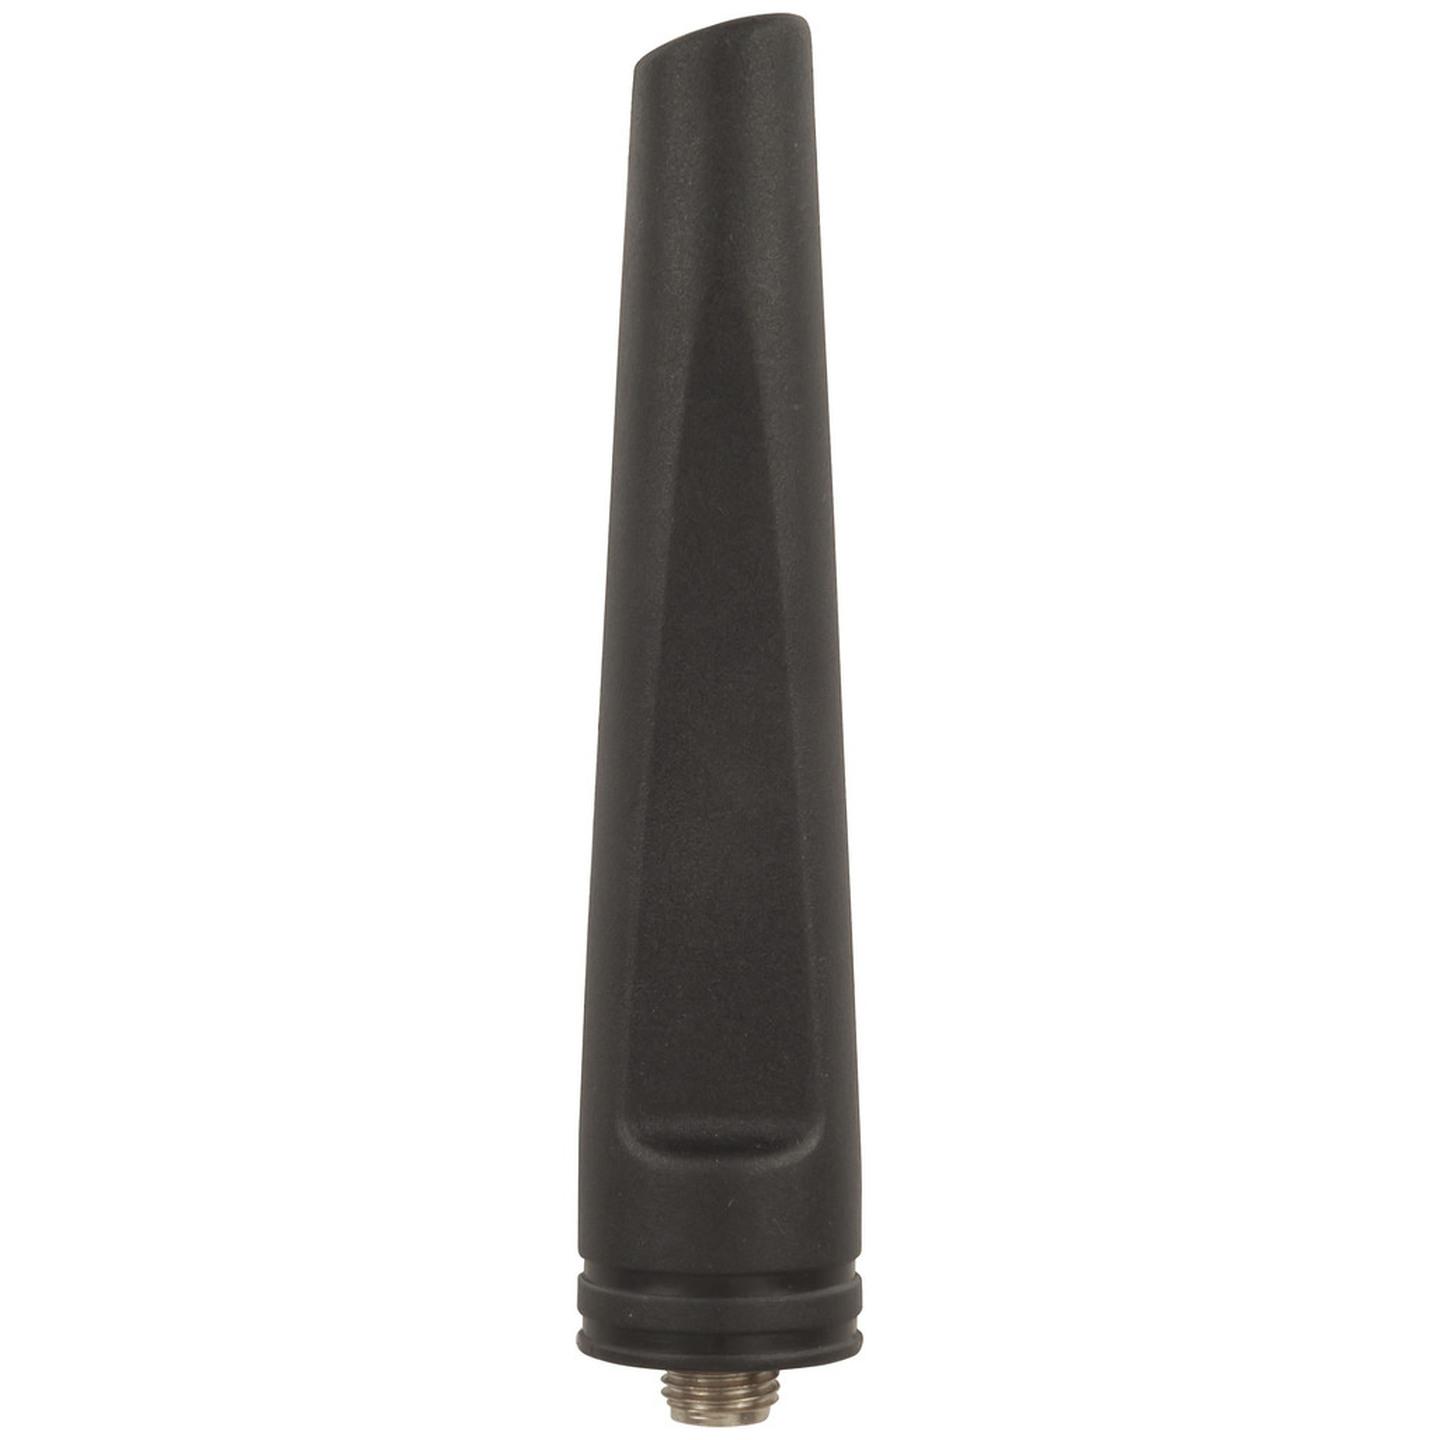 Spare Antenna to Suit NEXTECH 2W UHF Transceiver